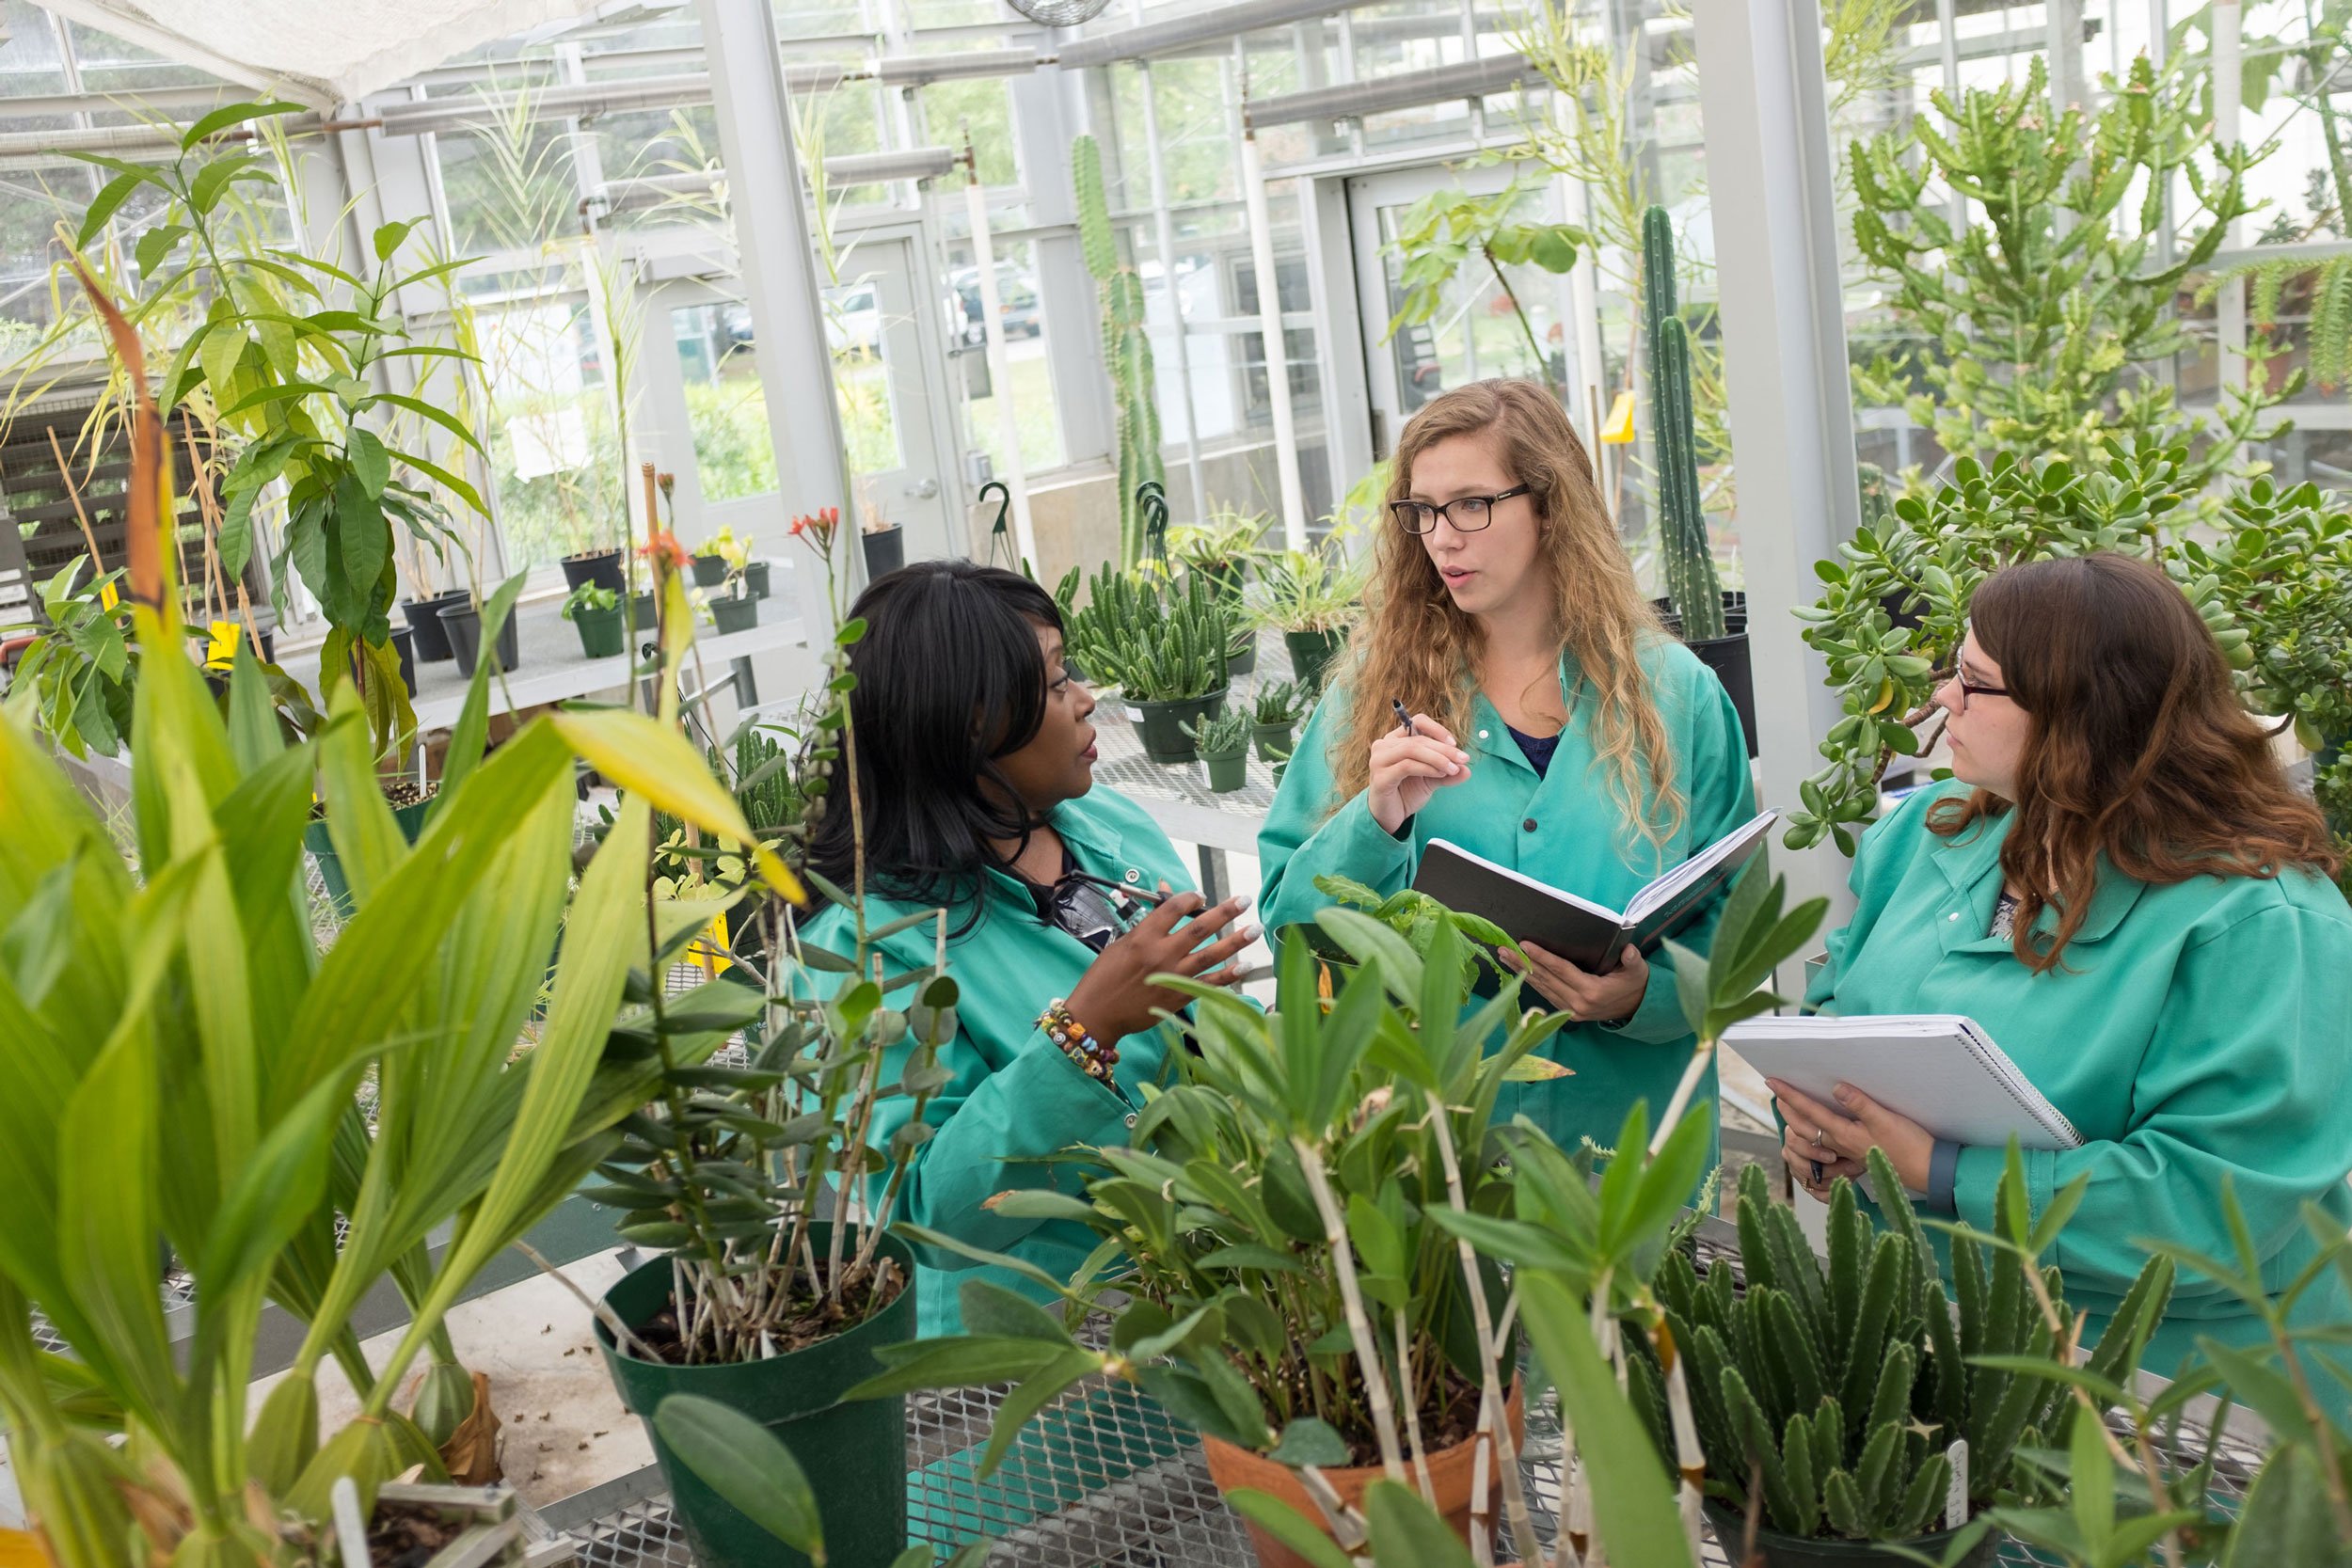 Chemistry Professor Dr. Rabi Musah works with her graduate students inside a greenhouse.